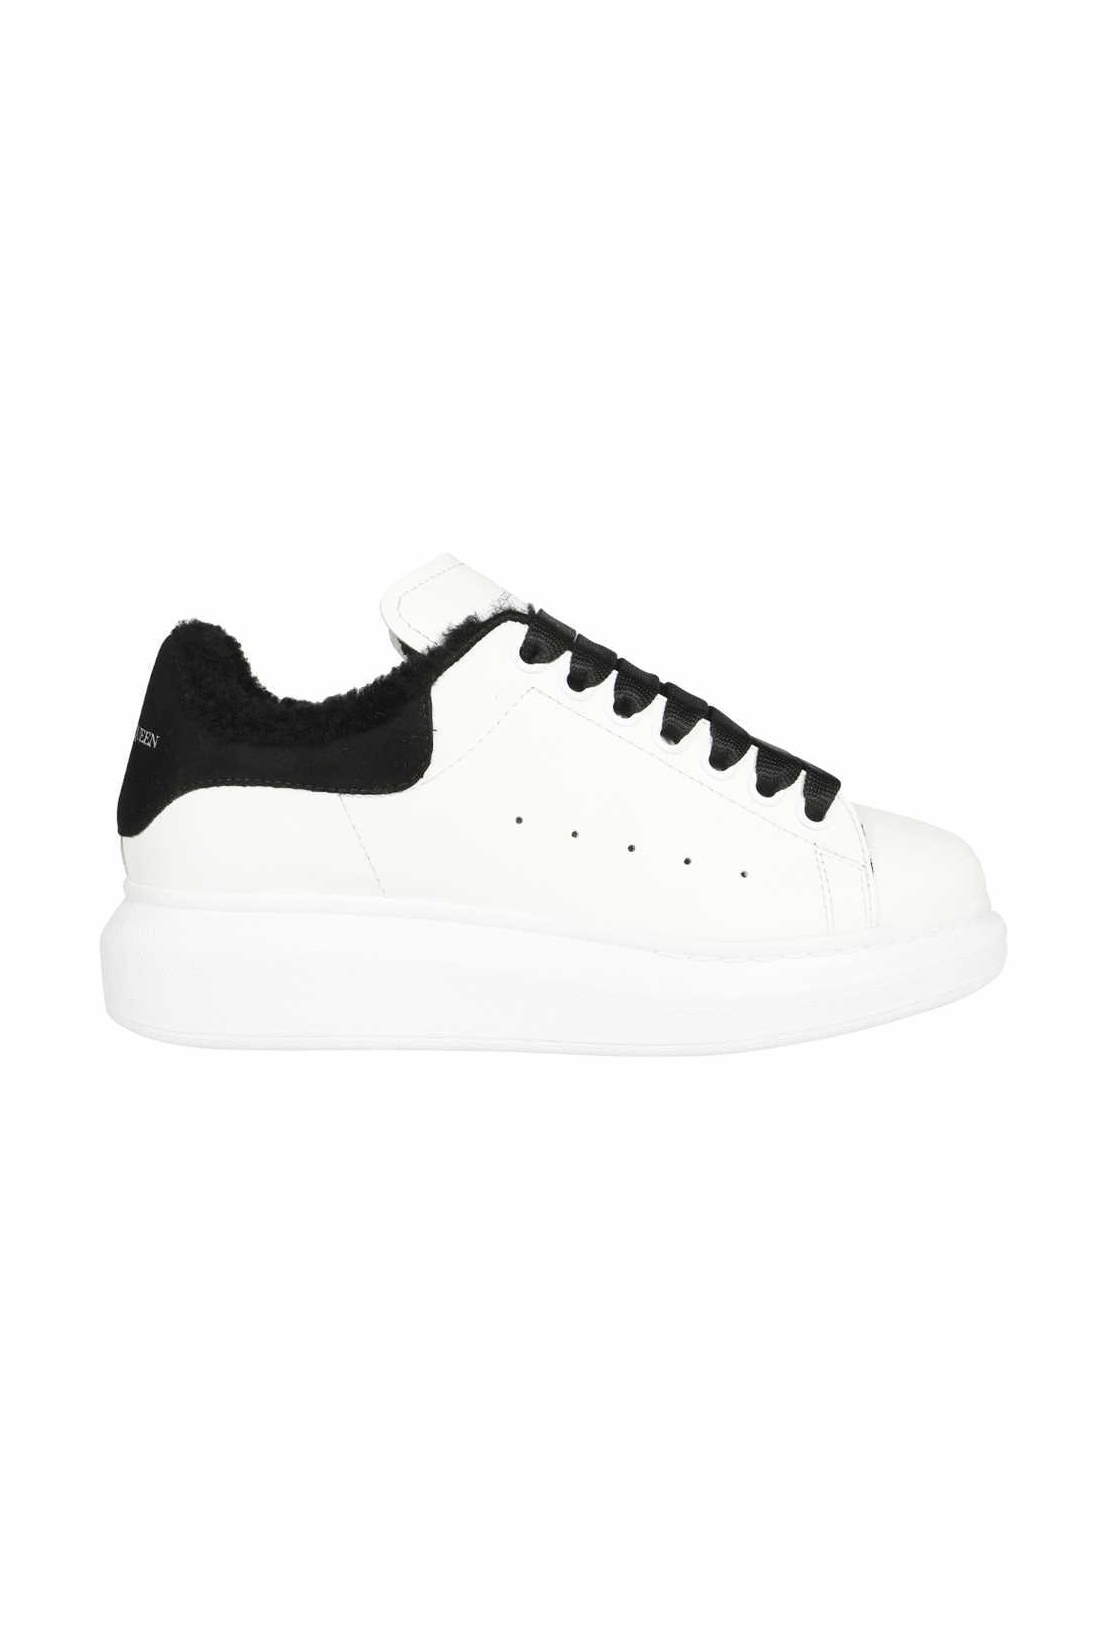 Larry leather sneakers